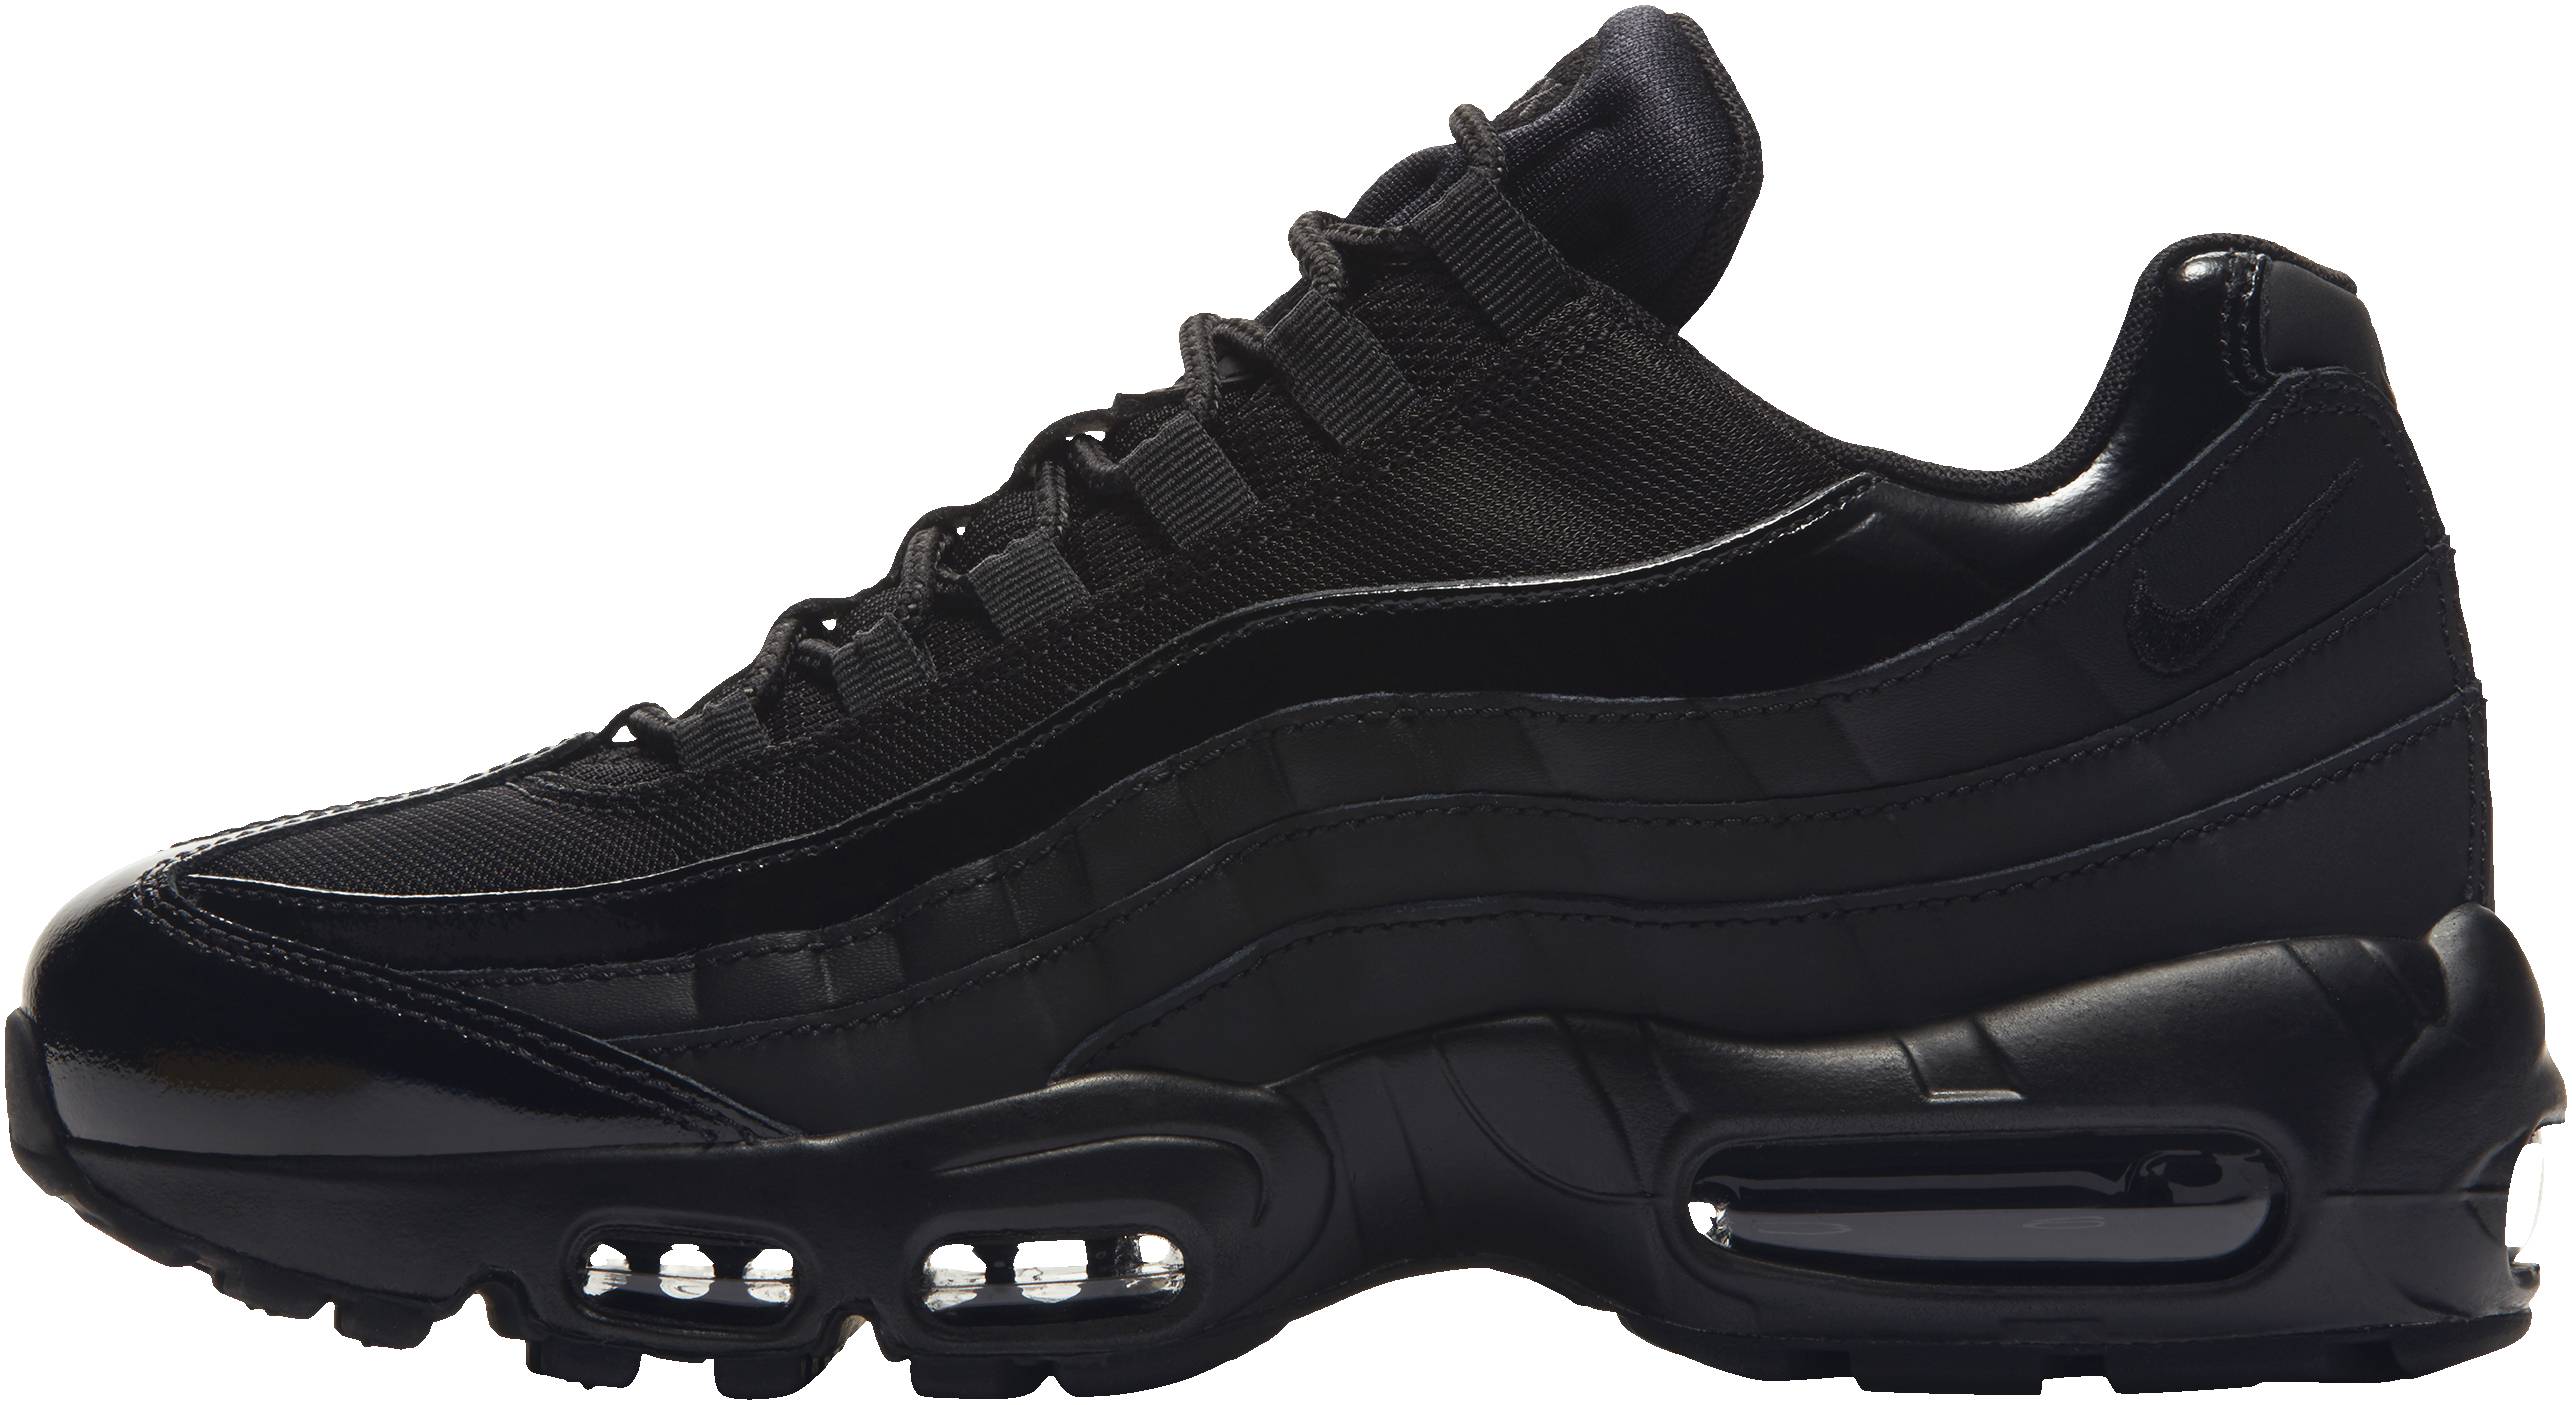 Only $139 + Review of Nike Air Max 95 